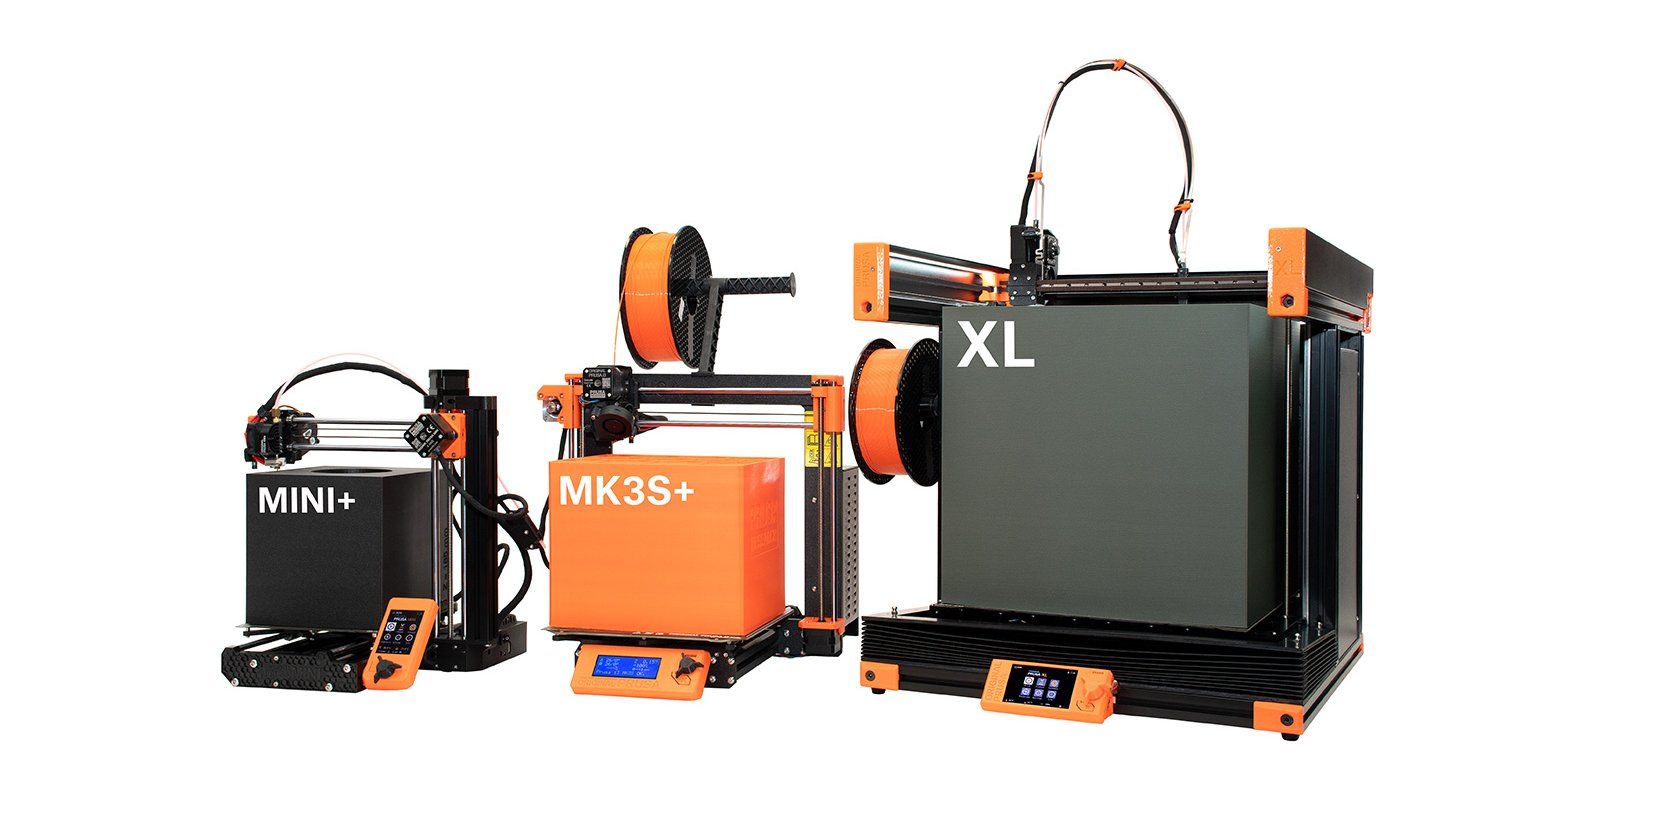 Prusa XL compared to existing Prusa range of printers.